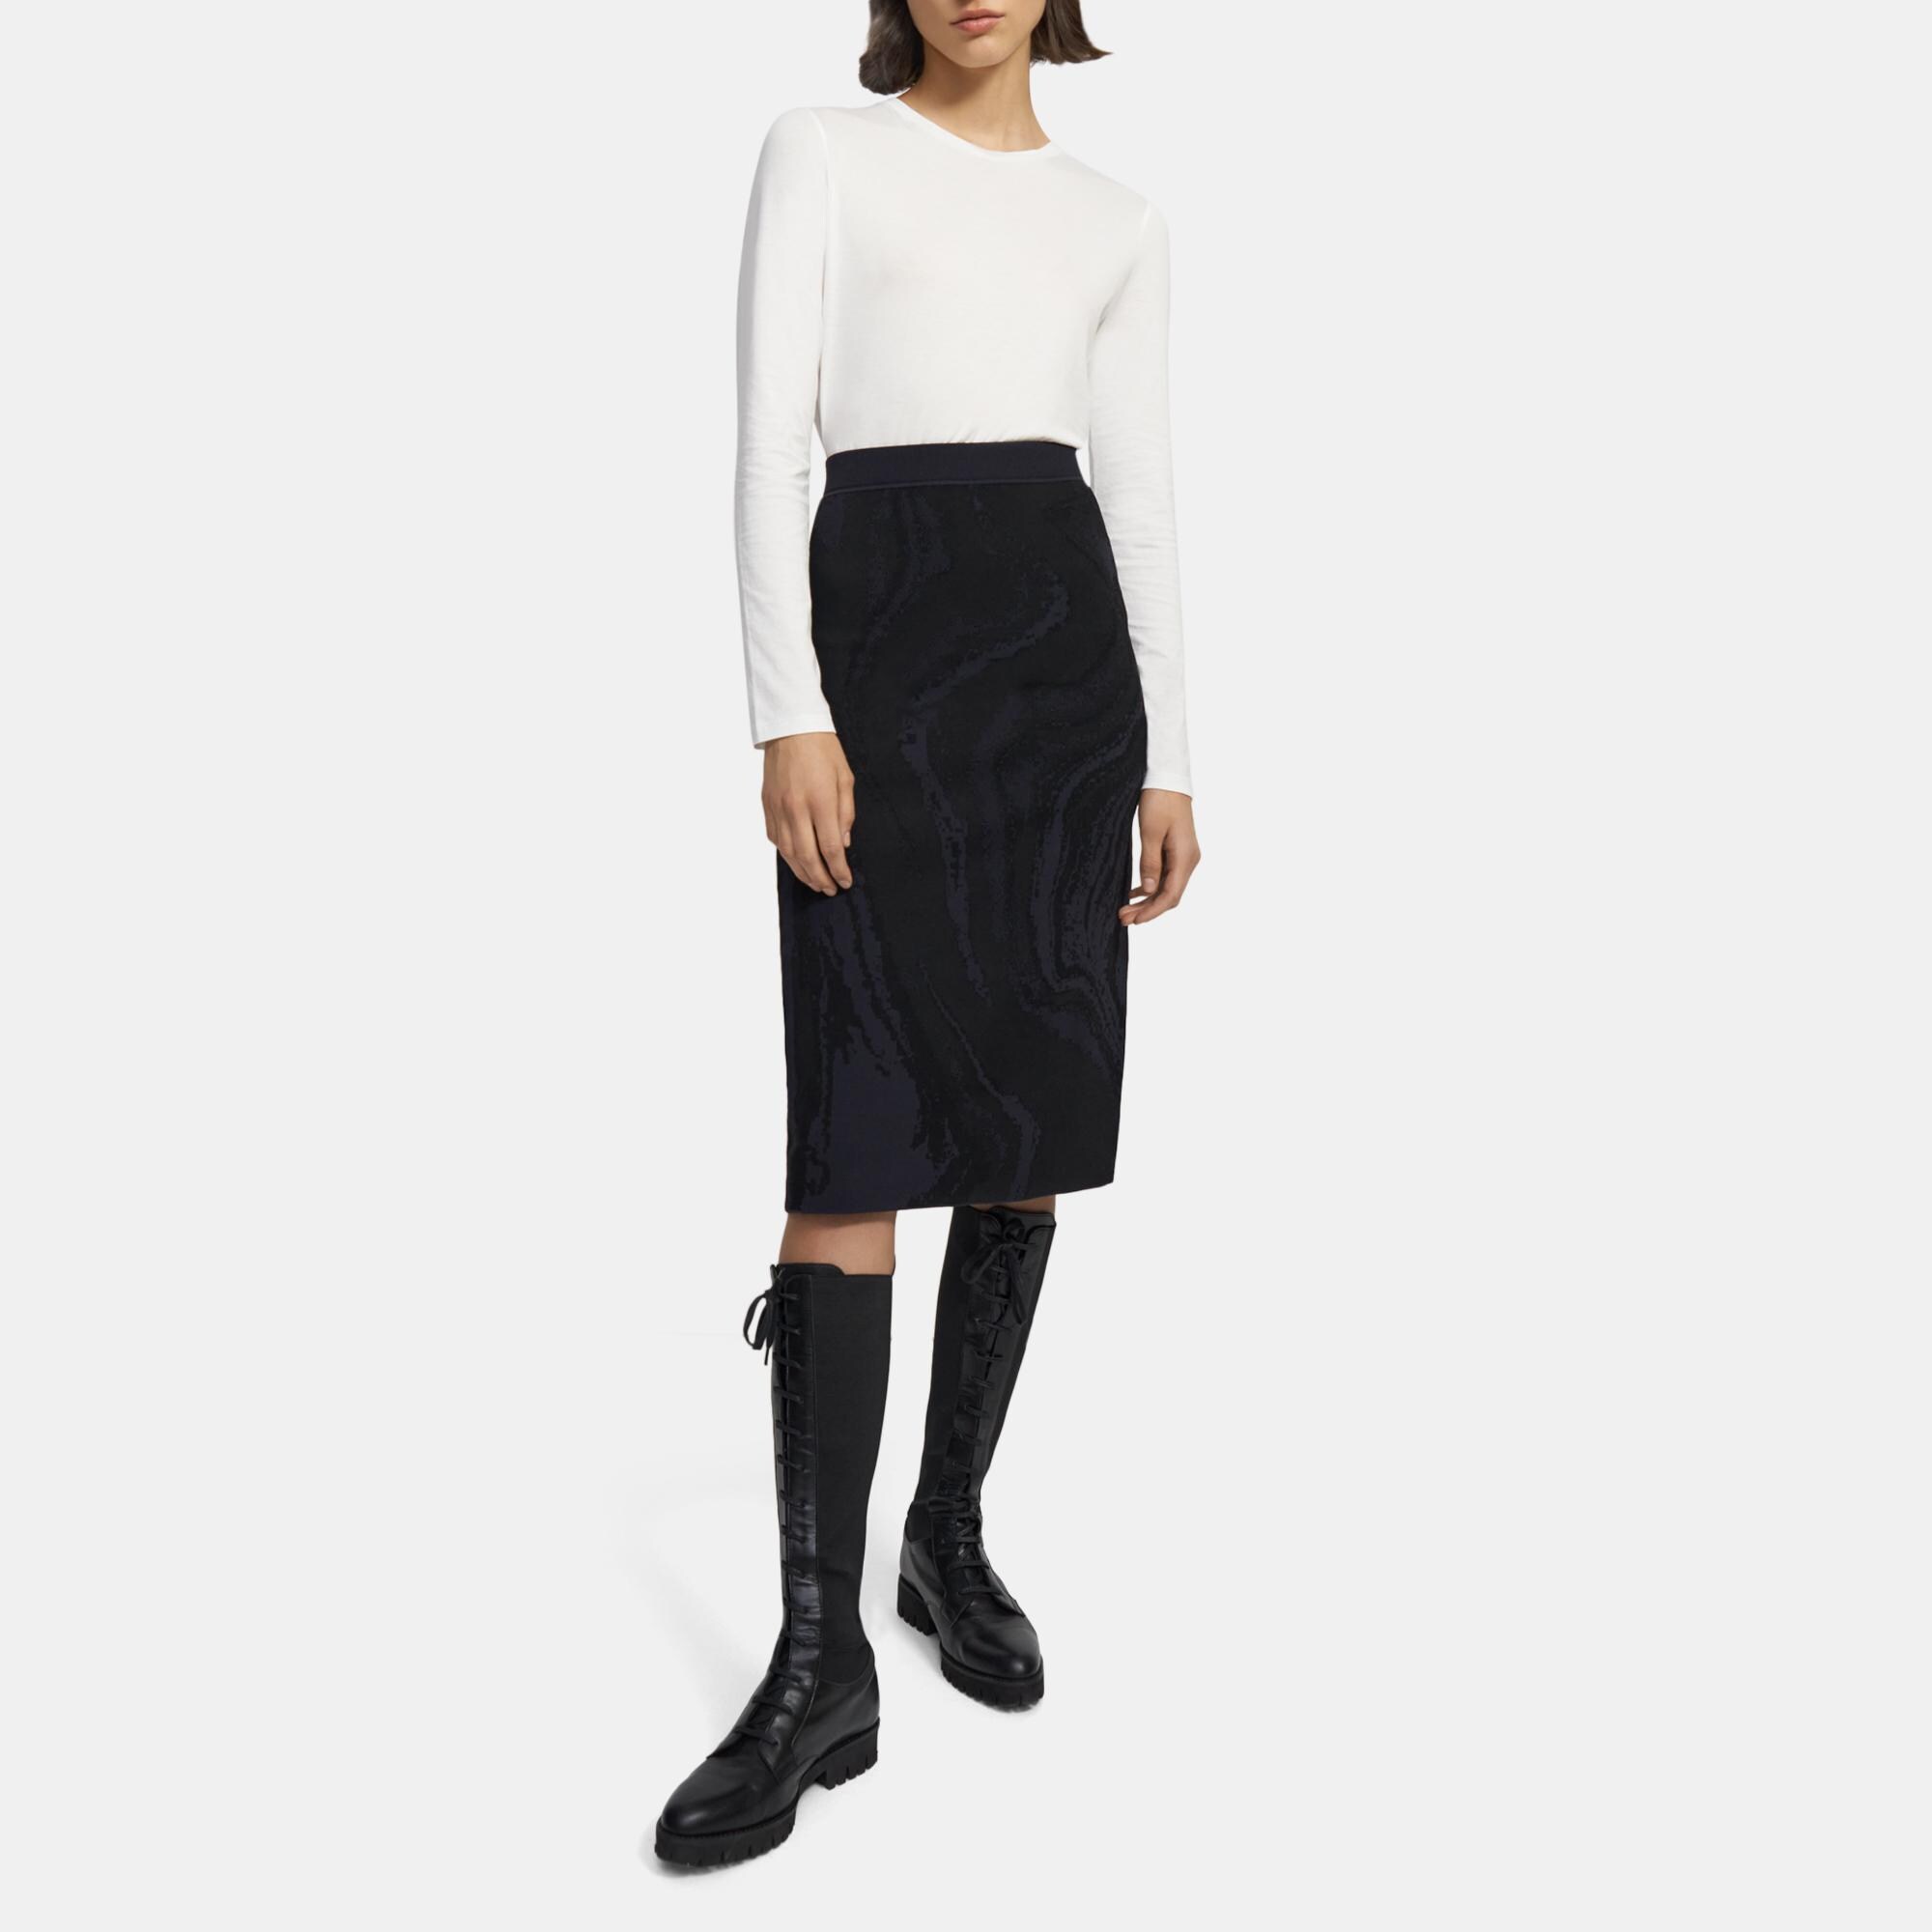 OIL SPILL SKIRT | Theory Outlet